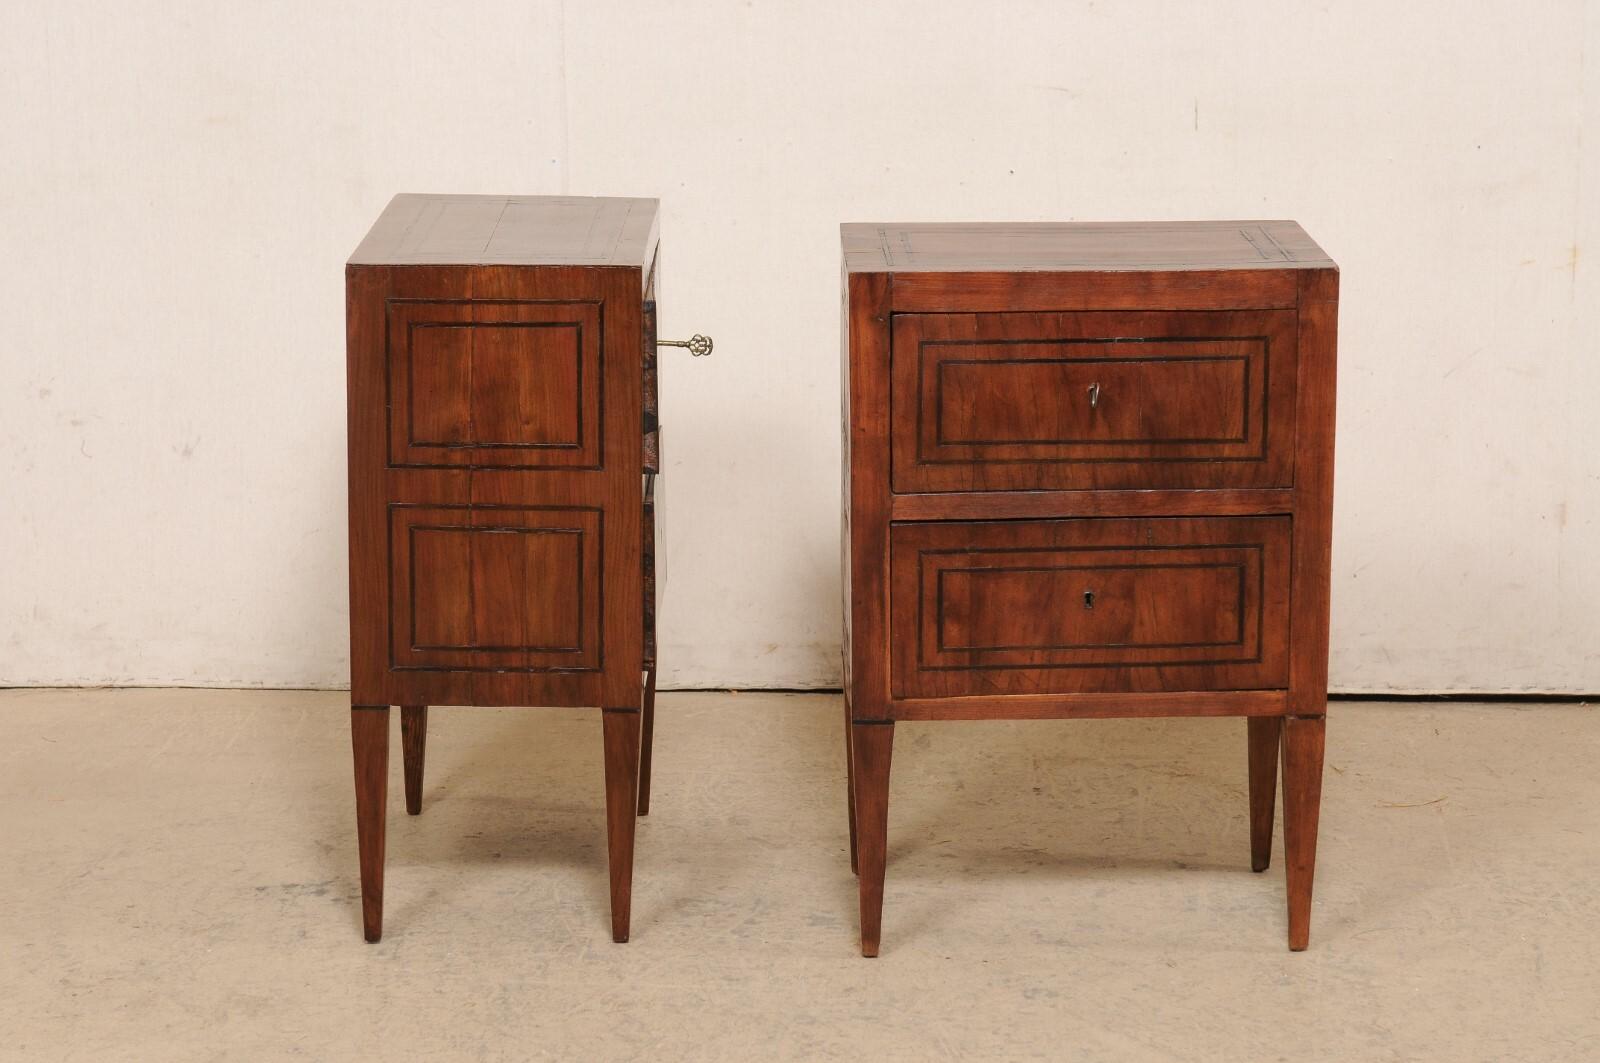 Italian Pair of Two-Drawer Side Chests w/Nice Inlay Banding, Early 19th C. For Sale 4